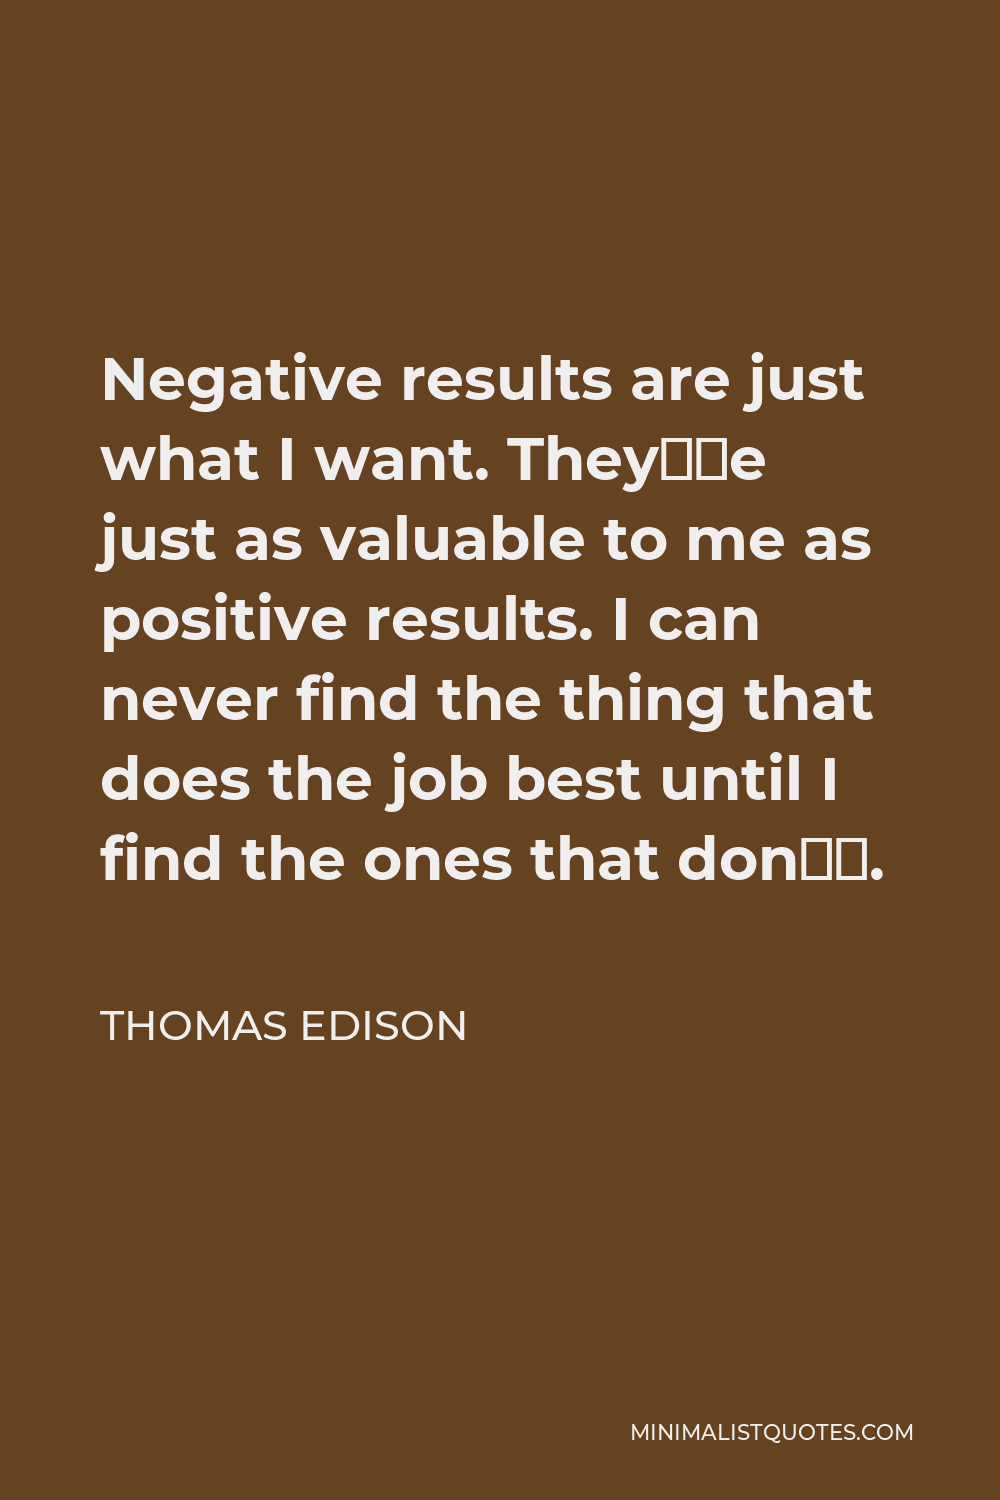 Thomas Edison Quote - Negative results are just what I want. They’re just as valuable to me as positive results. I can never find the thing that does the job best until I find the ones that don’t.